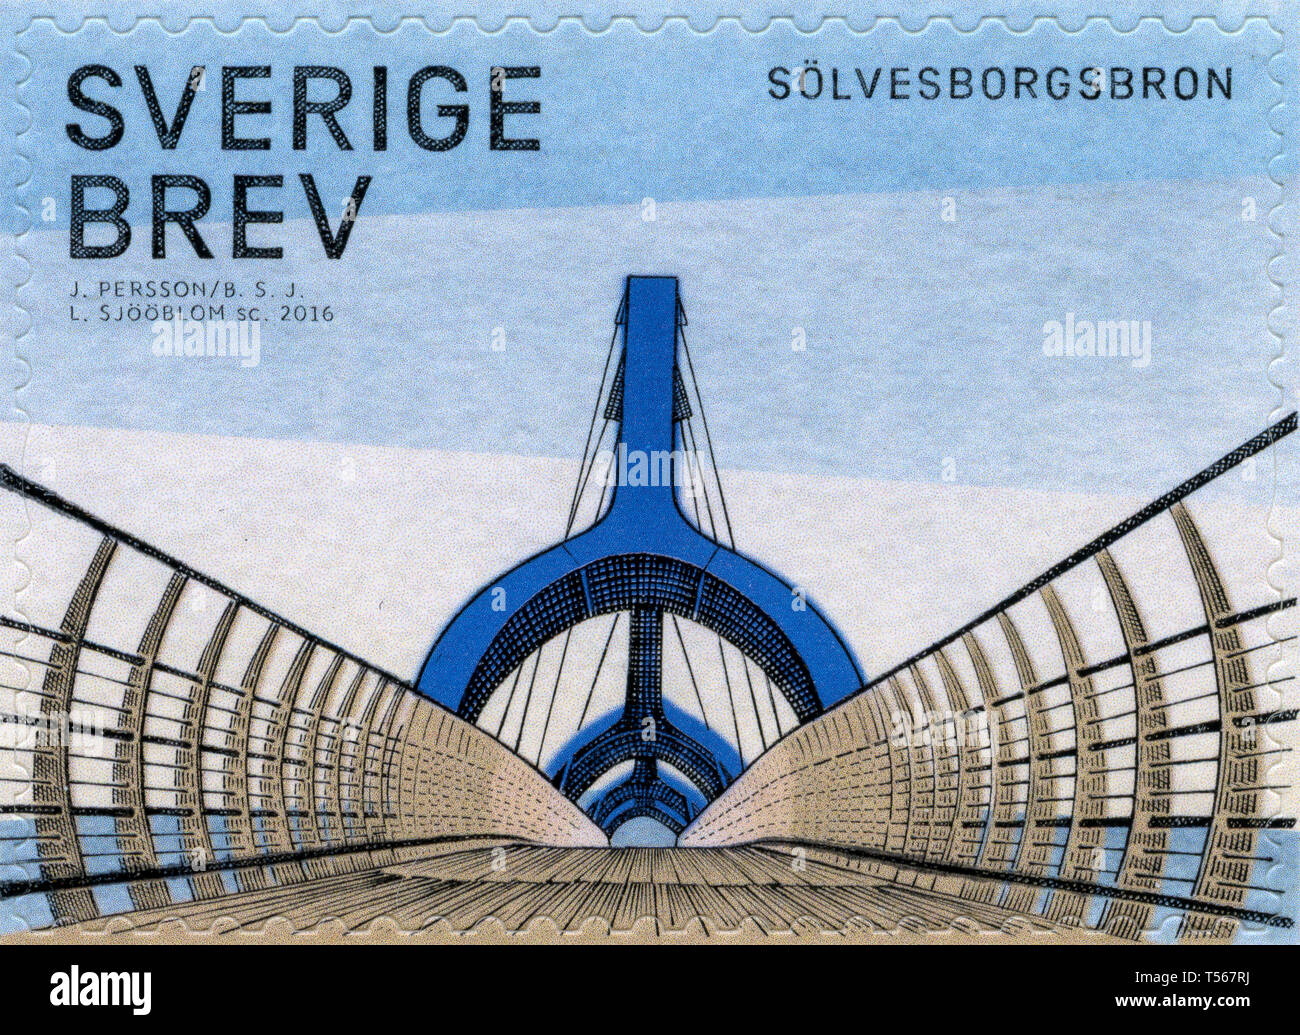 Postage stamp from Sweden in the Bridges series issued in 2016 ...